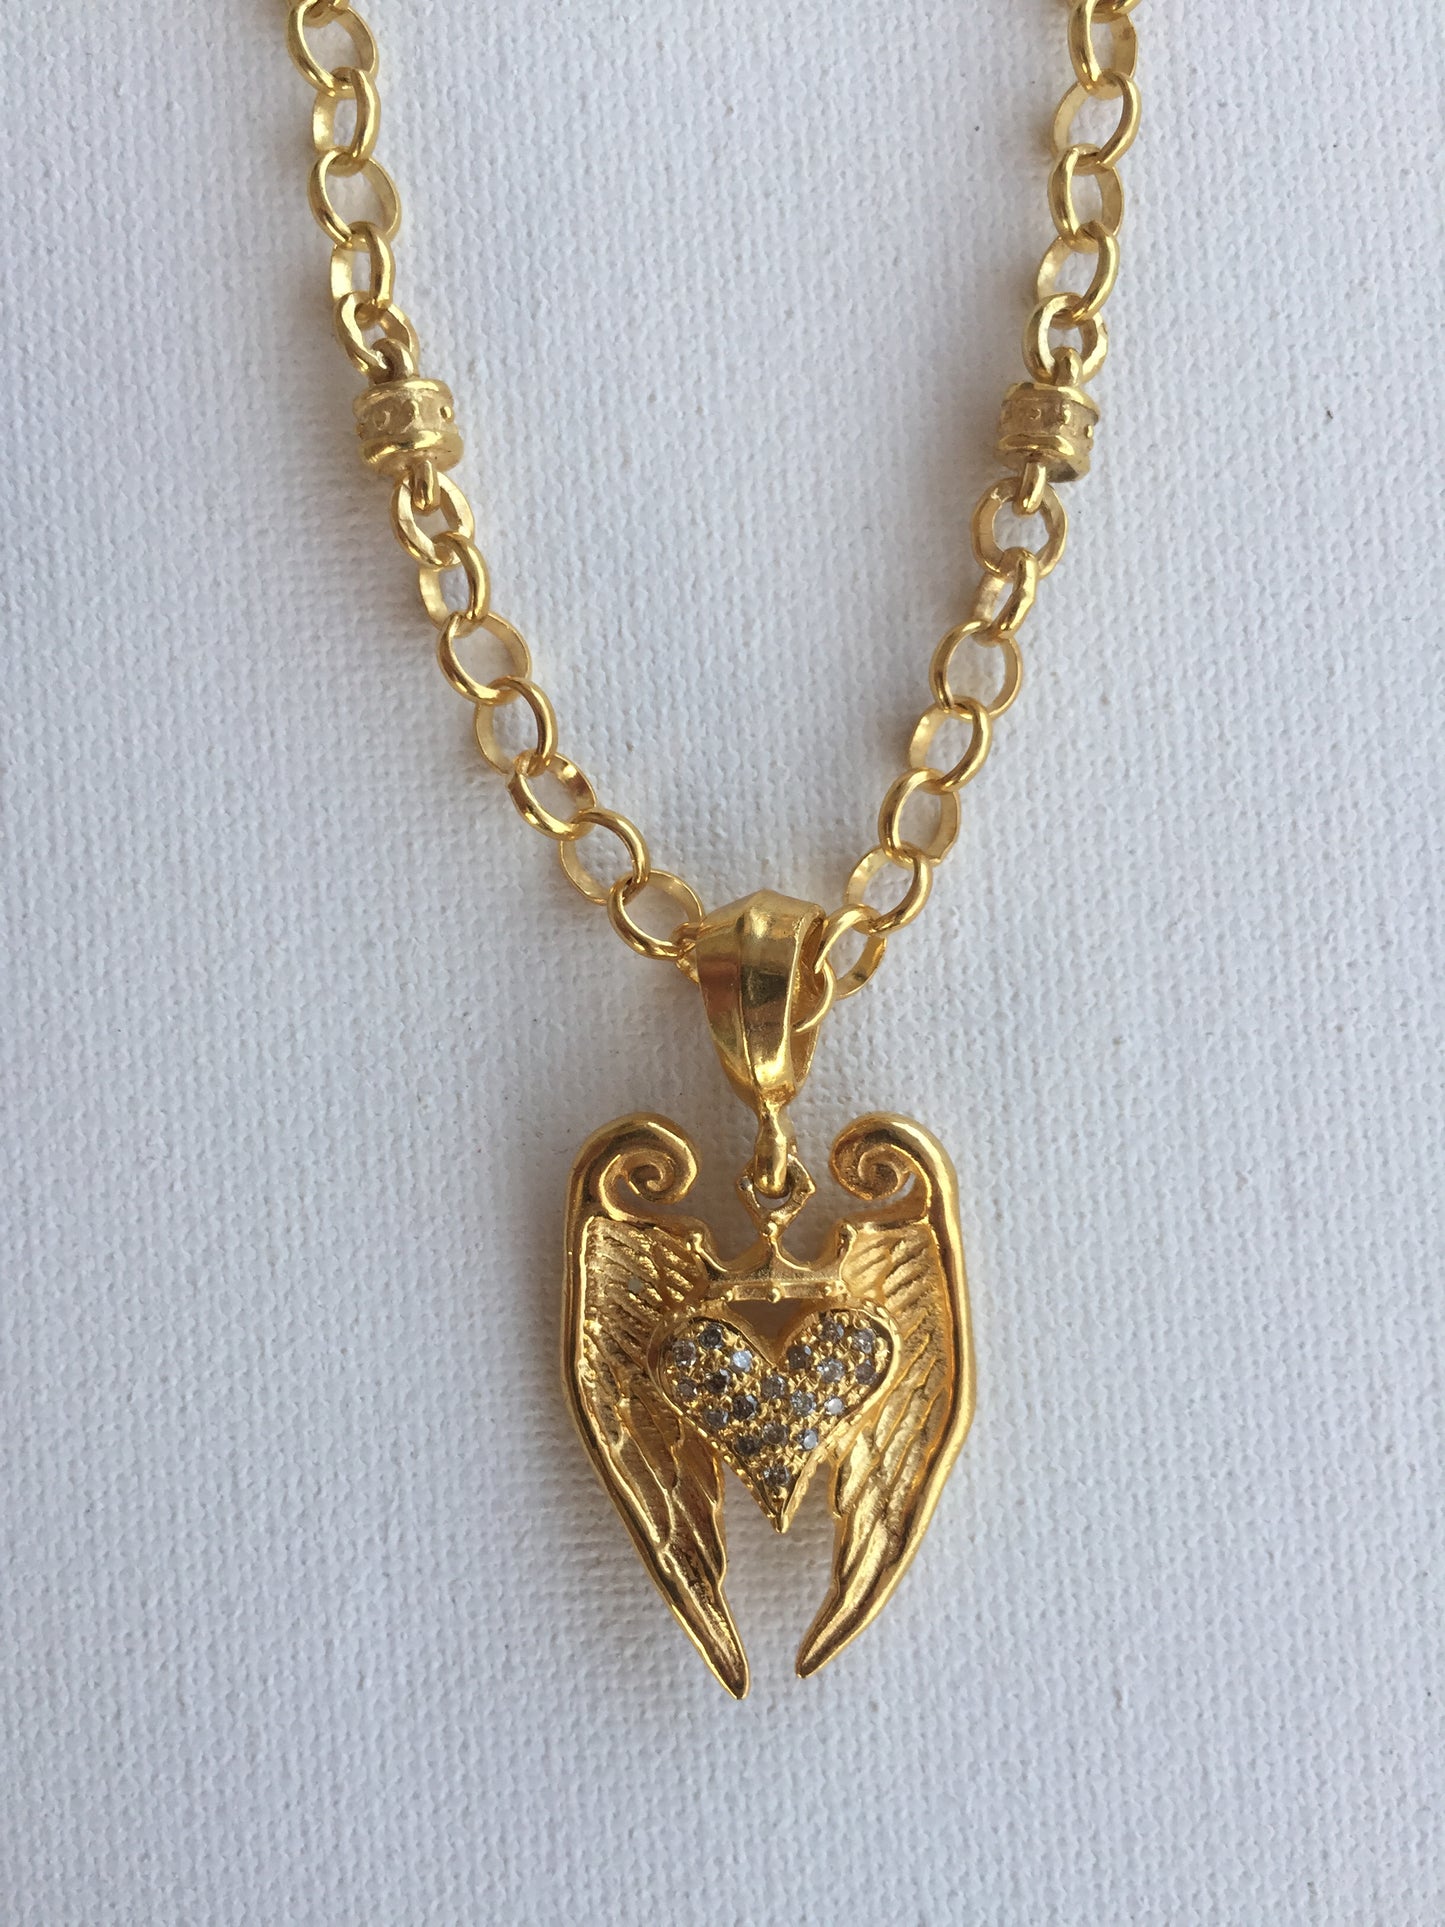 Necklace - Angel Golden Heart & Diamonds and Crown by Roman Paul